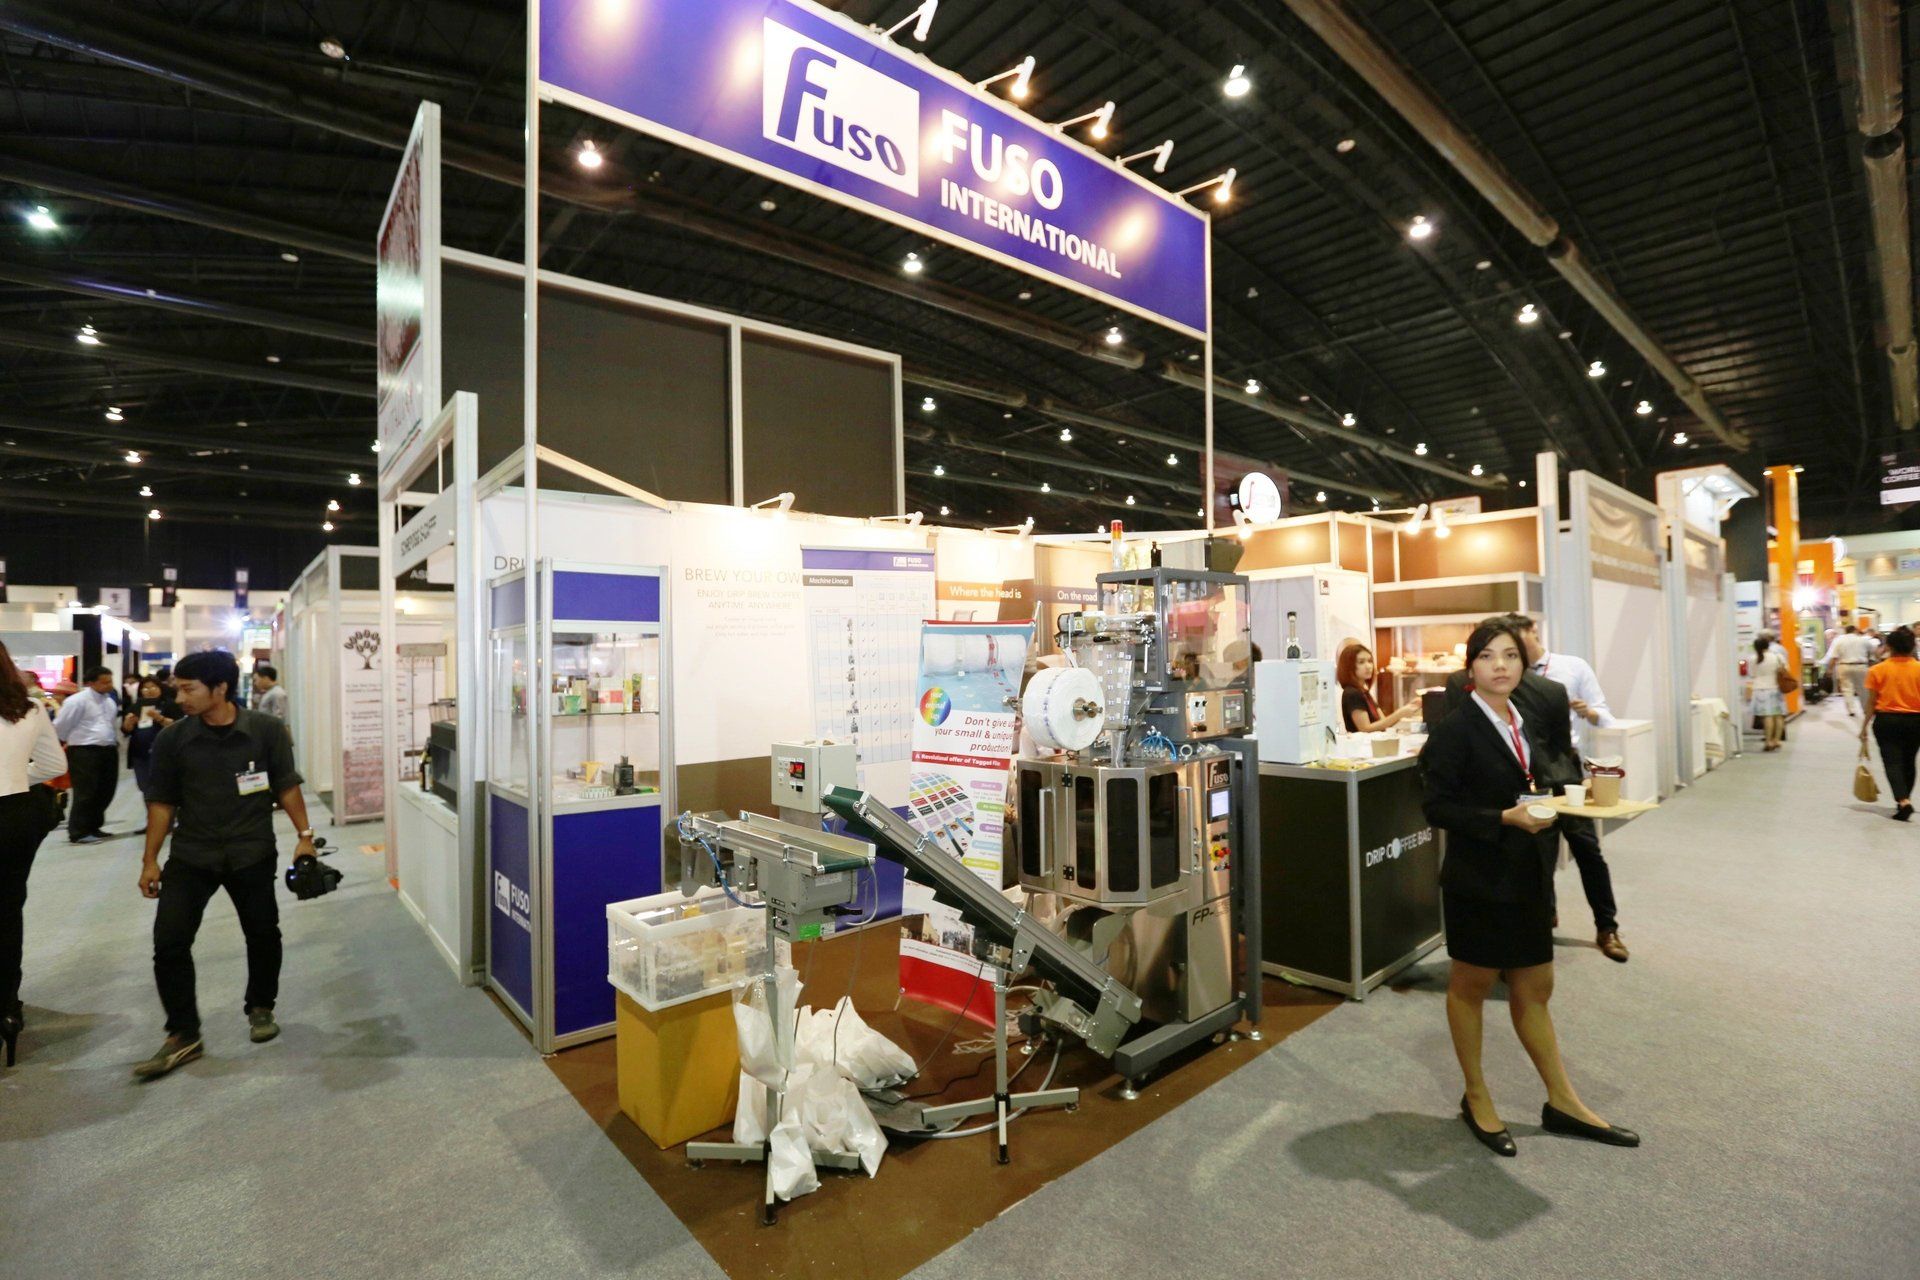 Fuso International @ Thaifex 2014.. Booth designed and built by Essential Global Fairs.